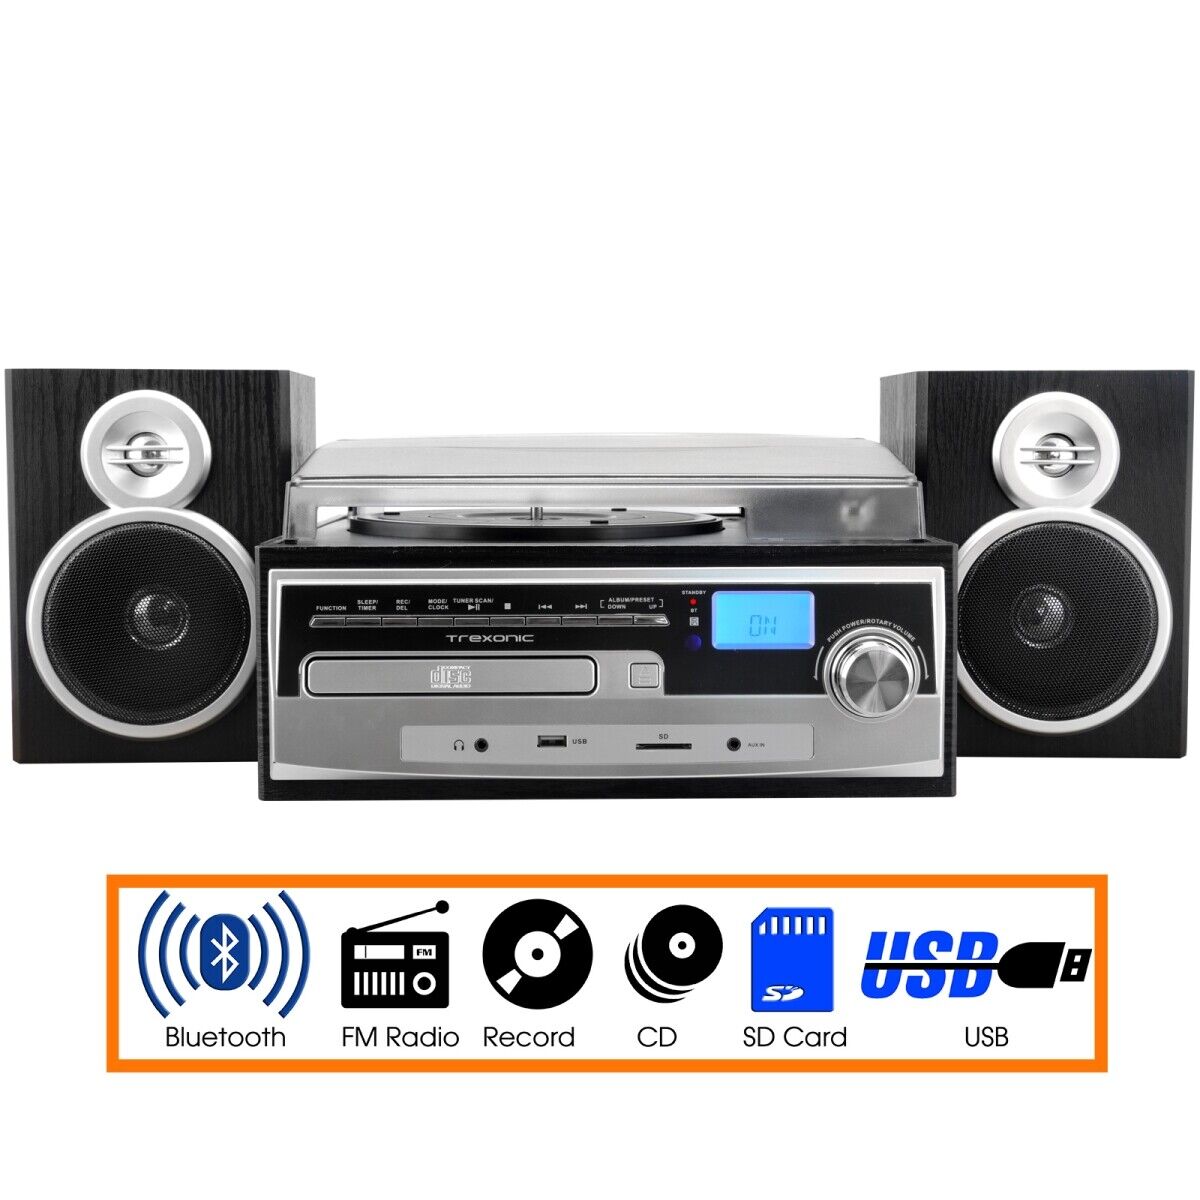 Stereo System Record Cd Player Fm Bluetooth Usb Aux